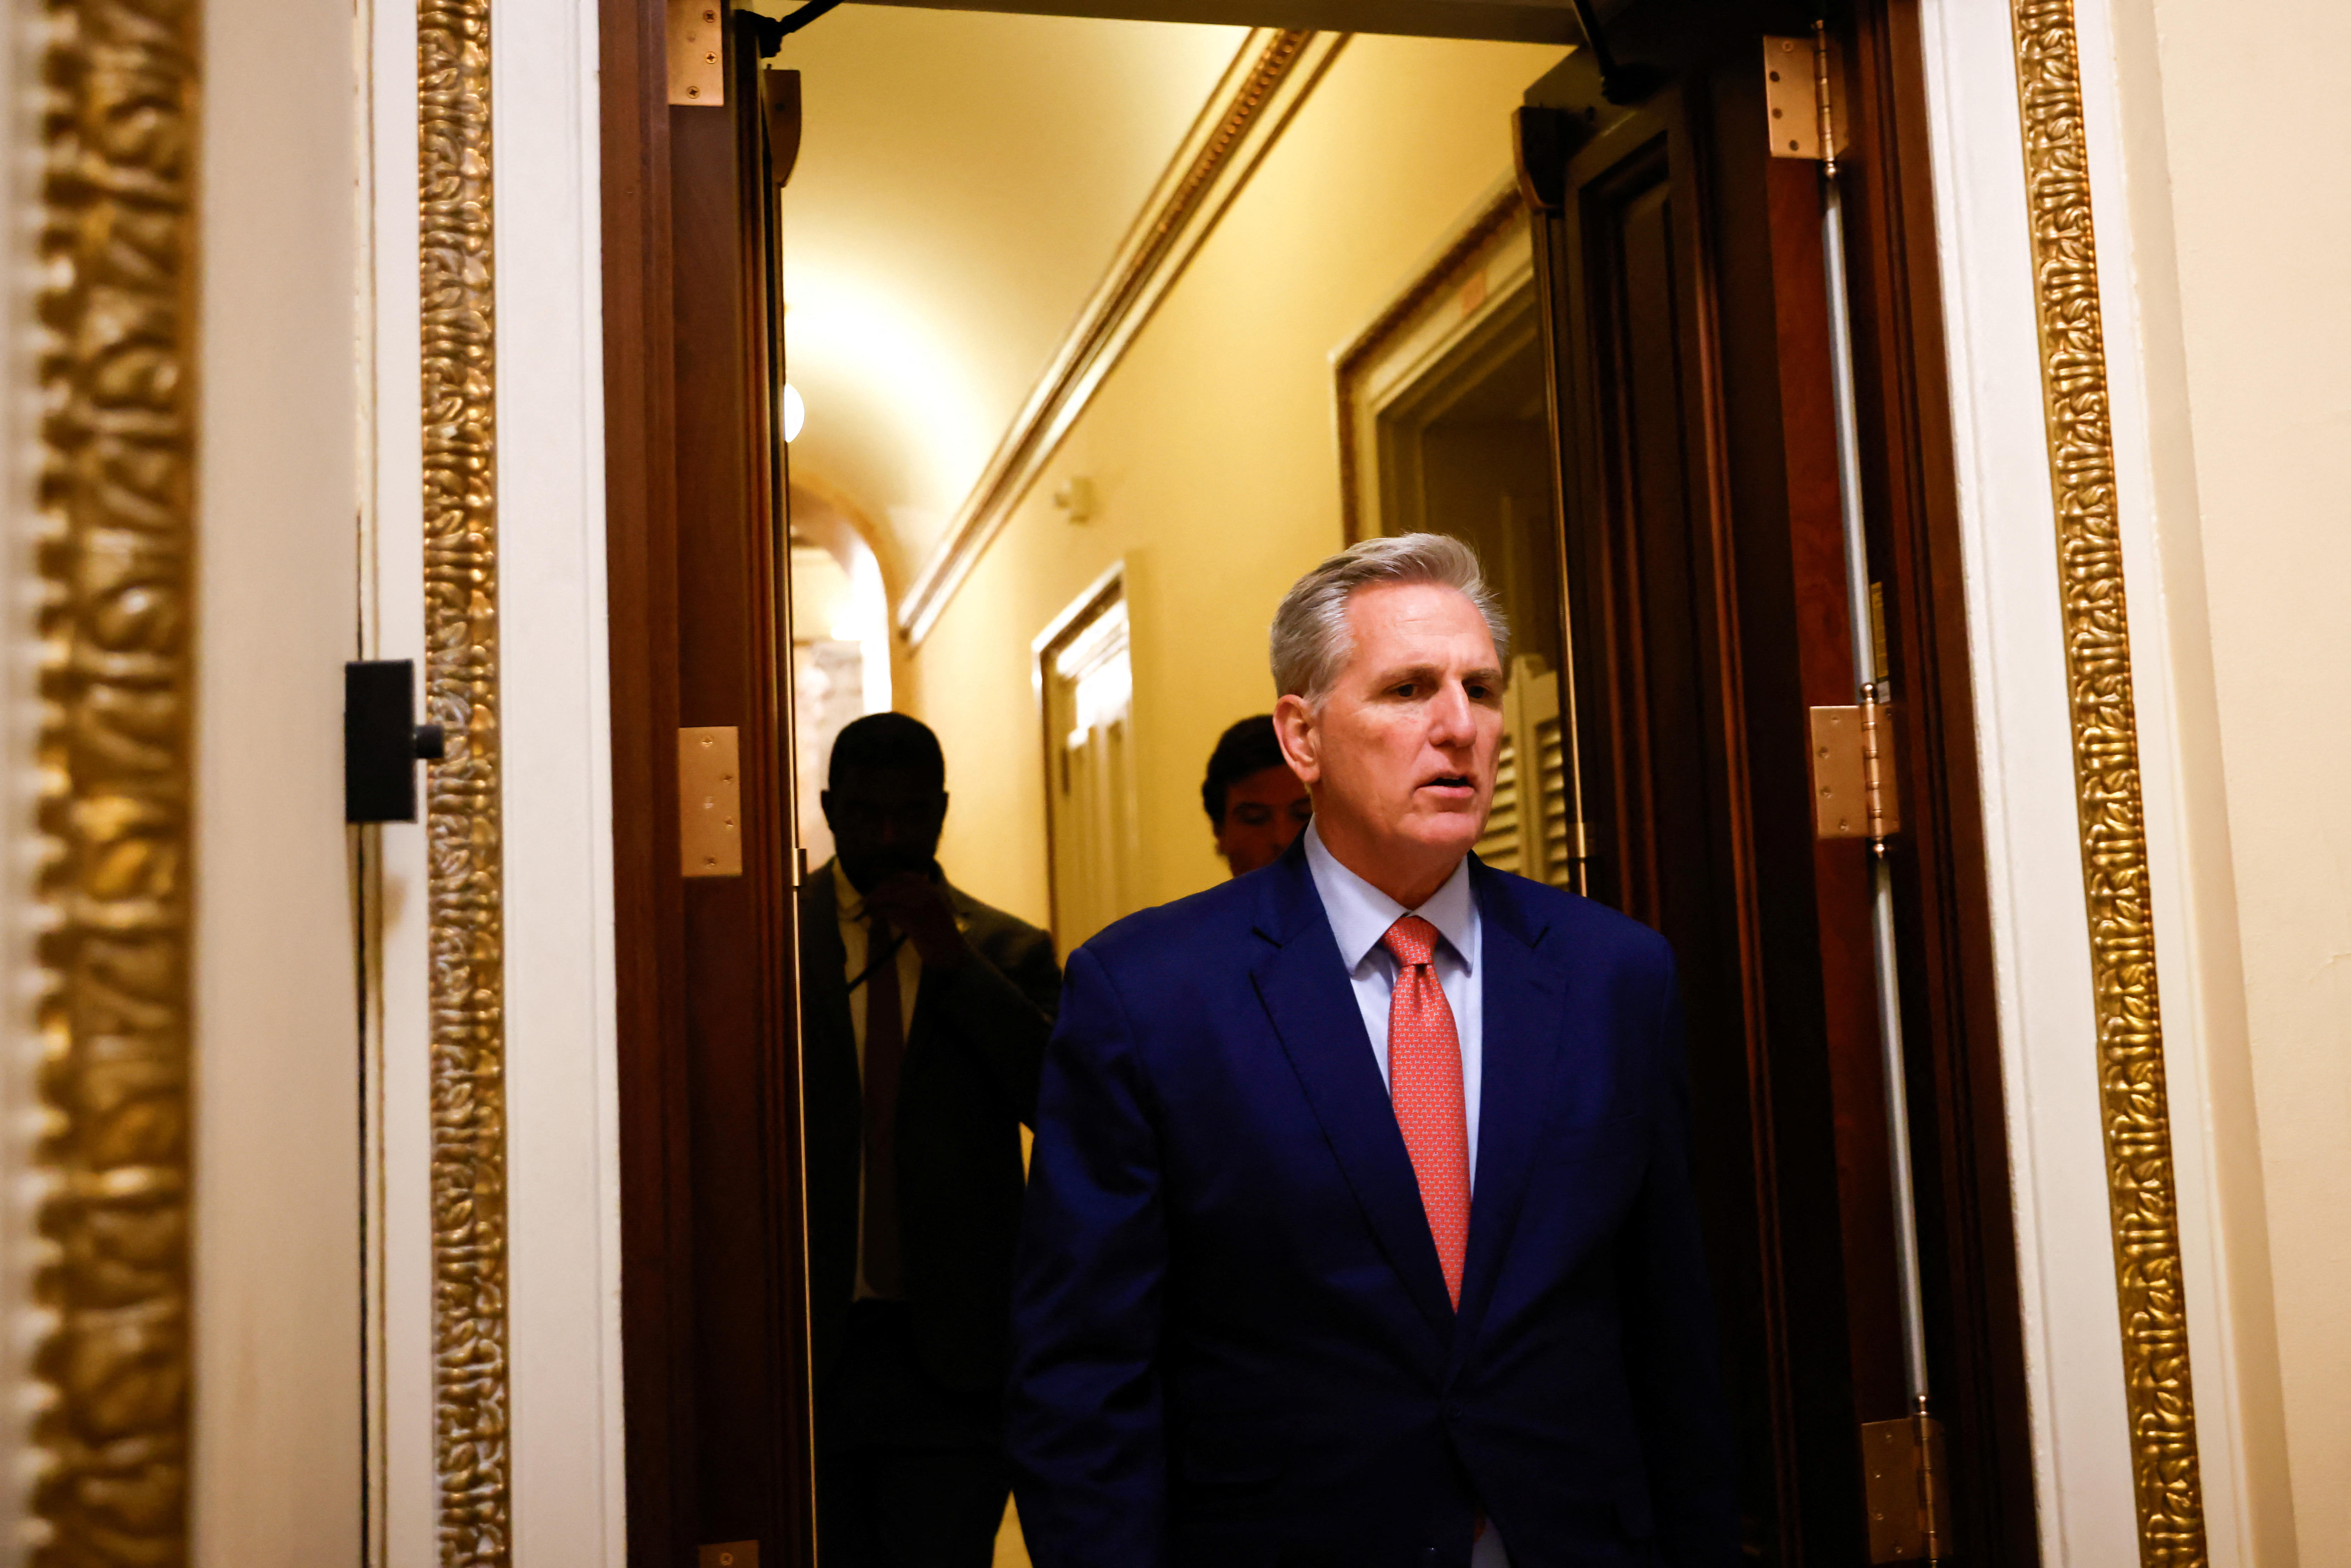 Former Speaker of the House Kevin McCarthy leaves the House of Representatives in Washington